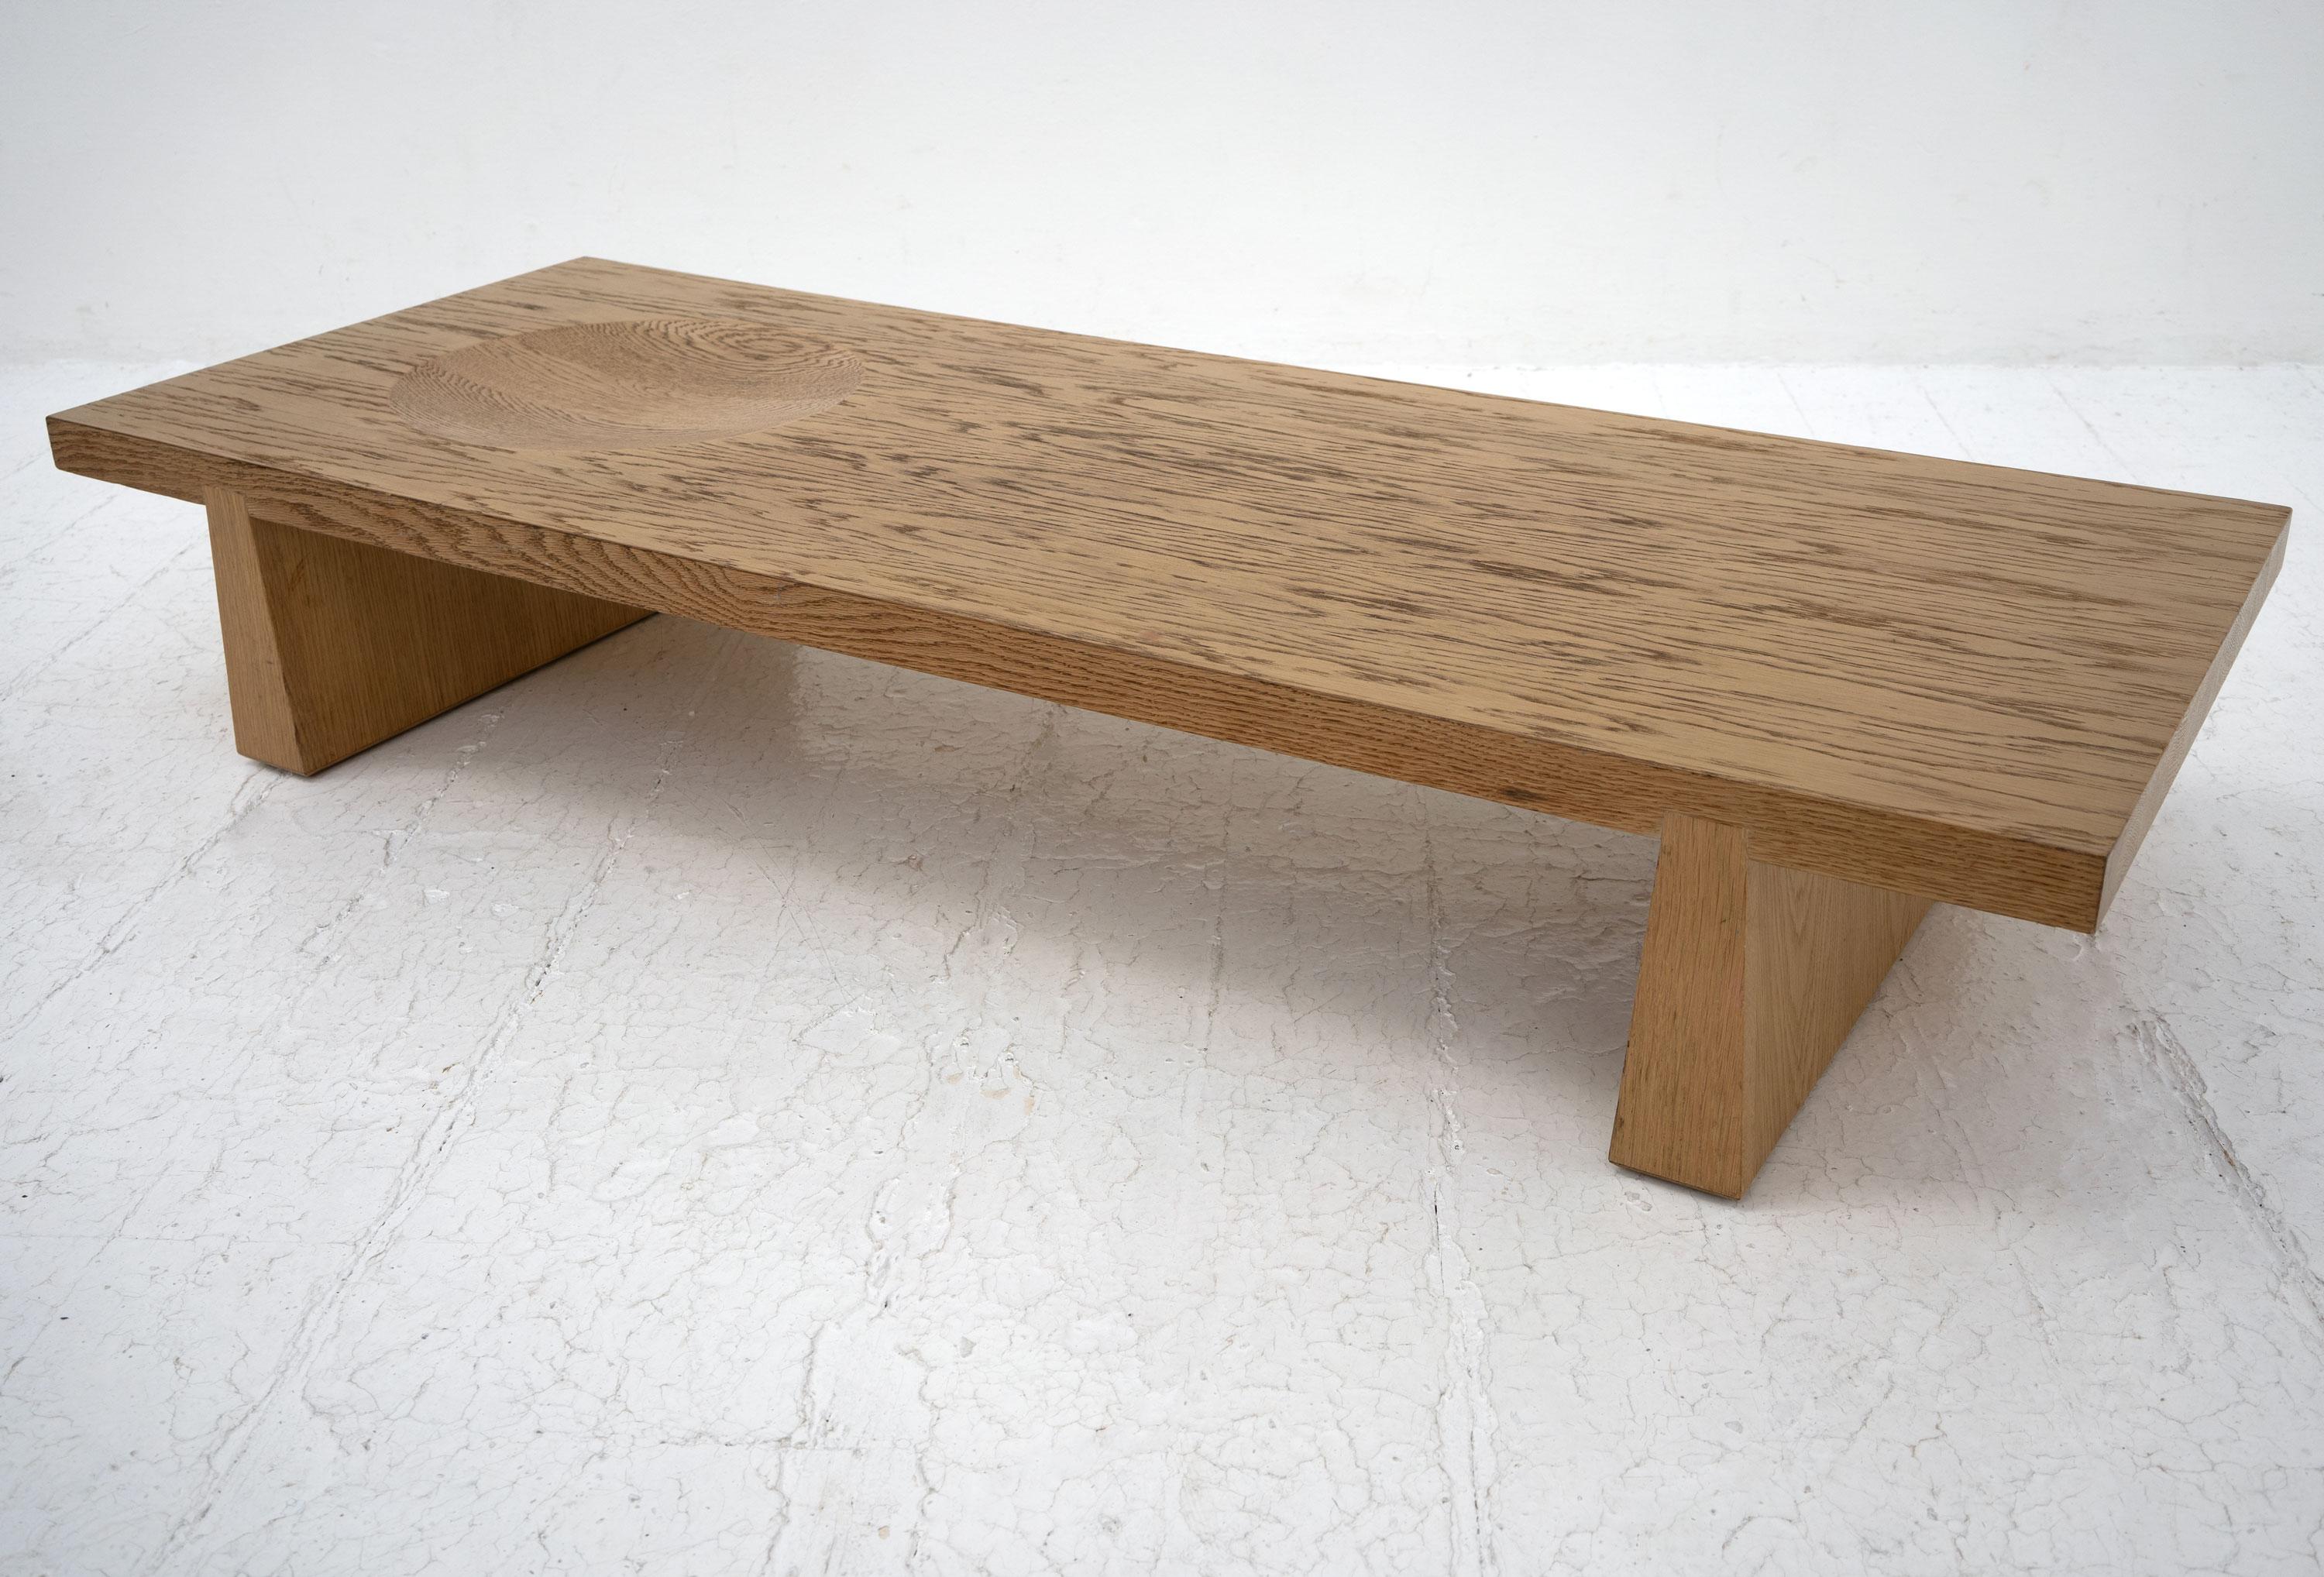 A vintage Japanese style coffee table made from oak and featuring an inset bowl.

Dimensions (cm, approx):
Height: 28
Width: 120
Depth: 54 